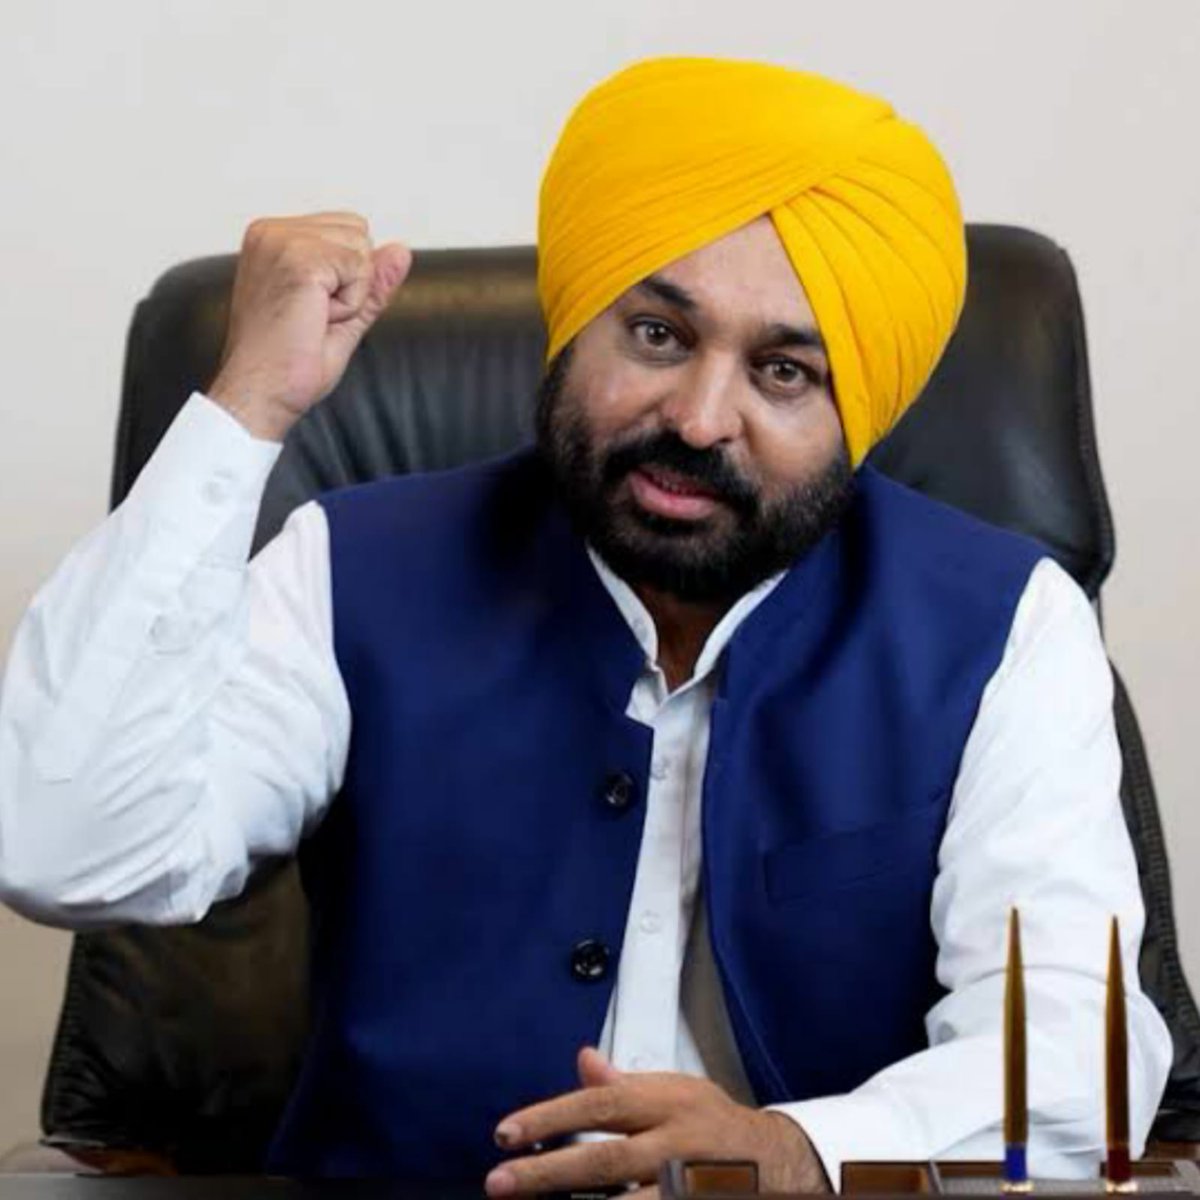 Big Announcement by @BhagwantMann Govt ‼️ ➡️4358 constables will get appointment letters ➡️Appointment letters will be handed over on August 23rd